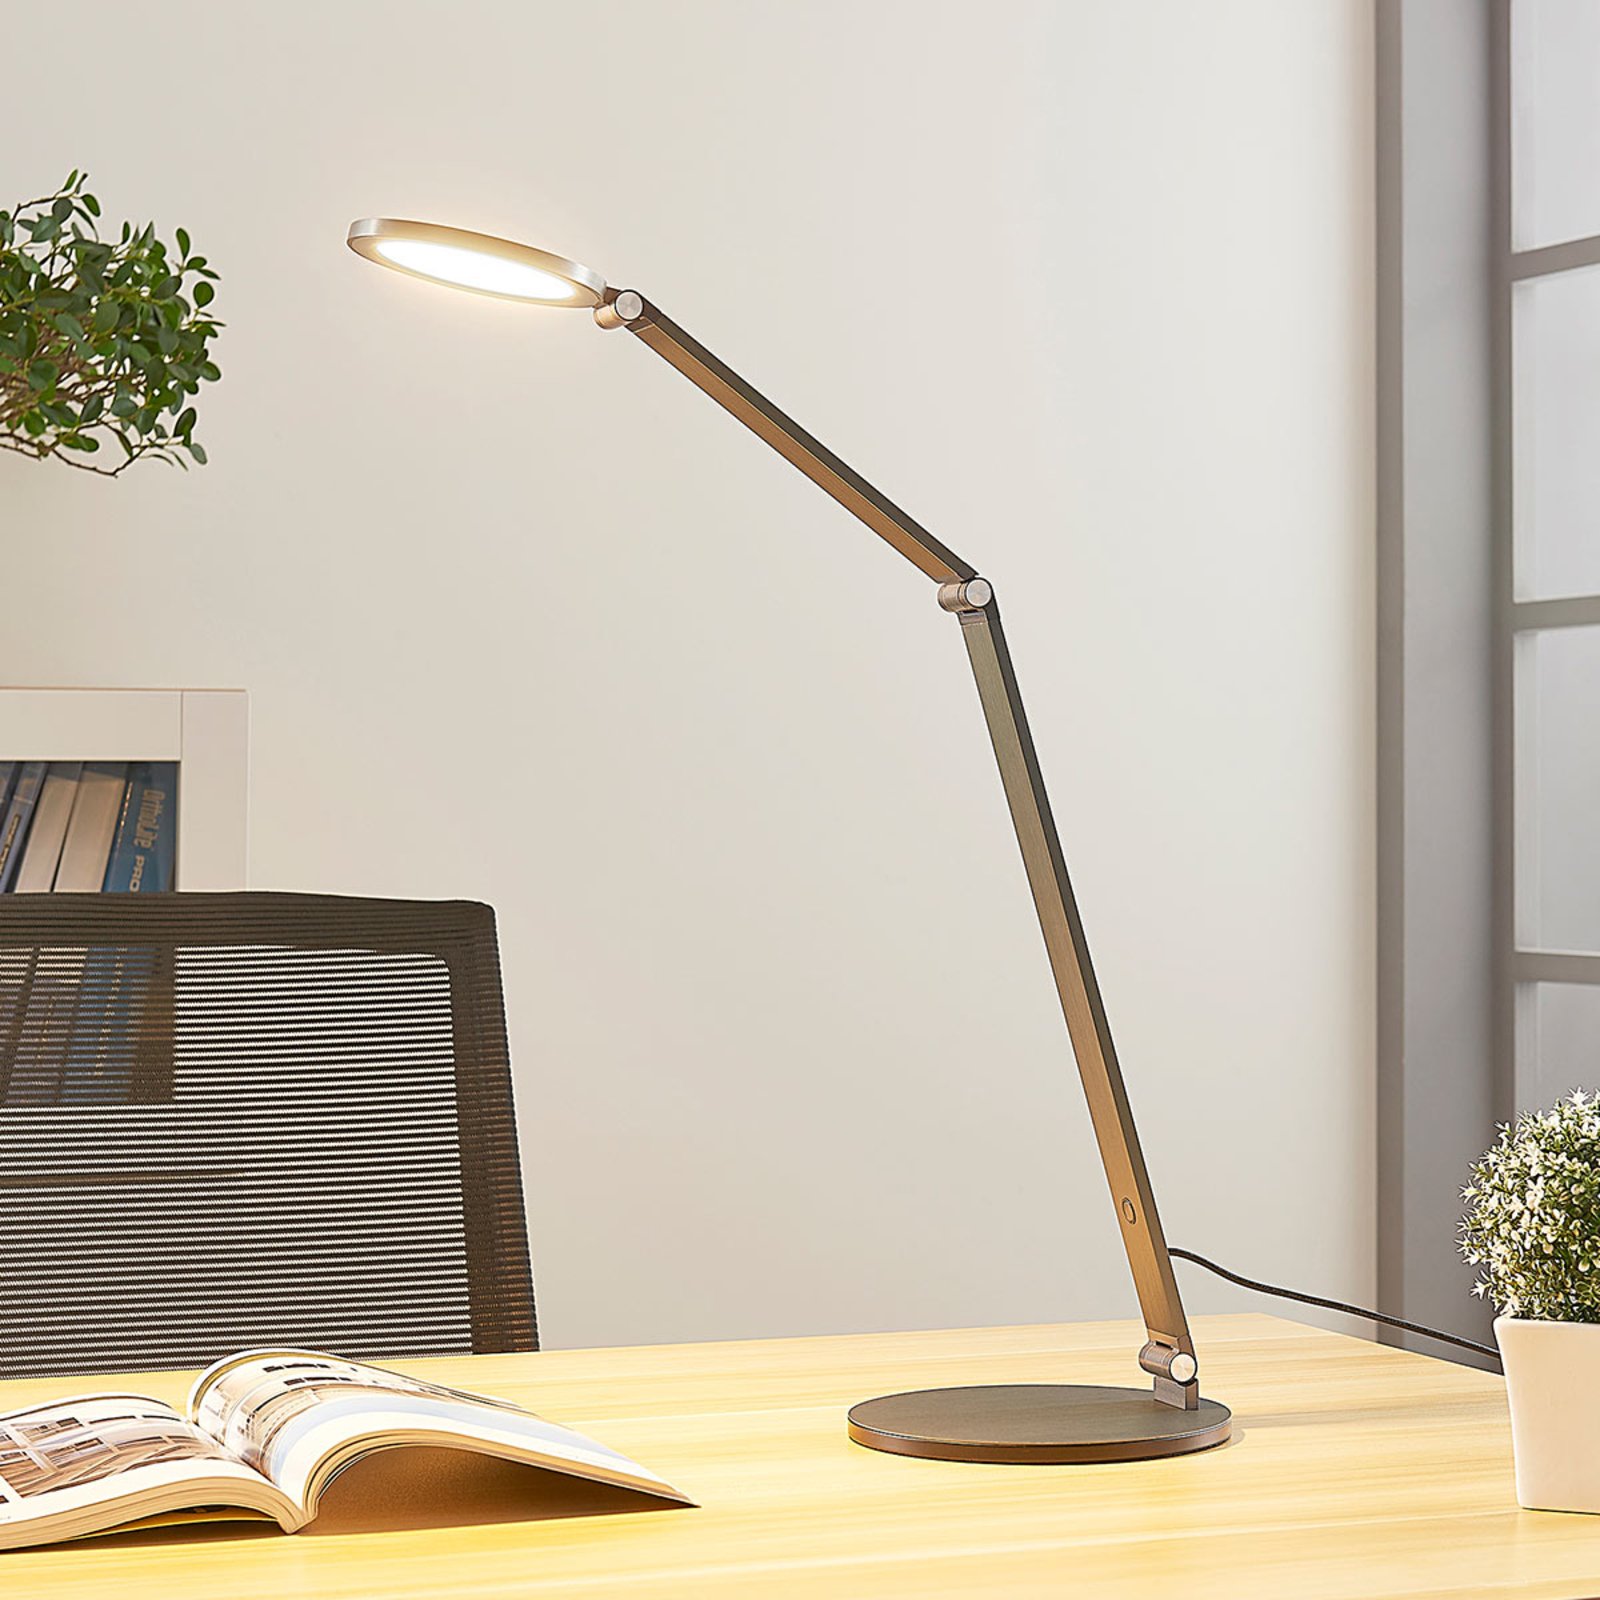 LED desk lamp Mion with dimmer